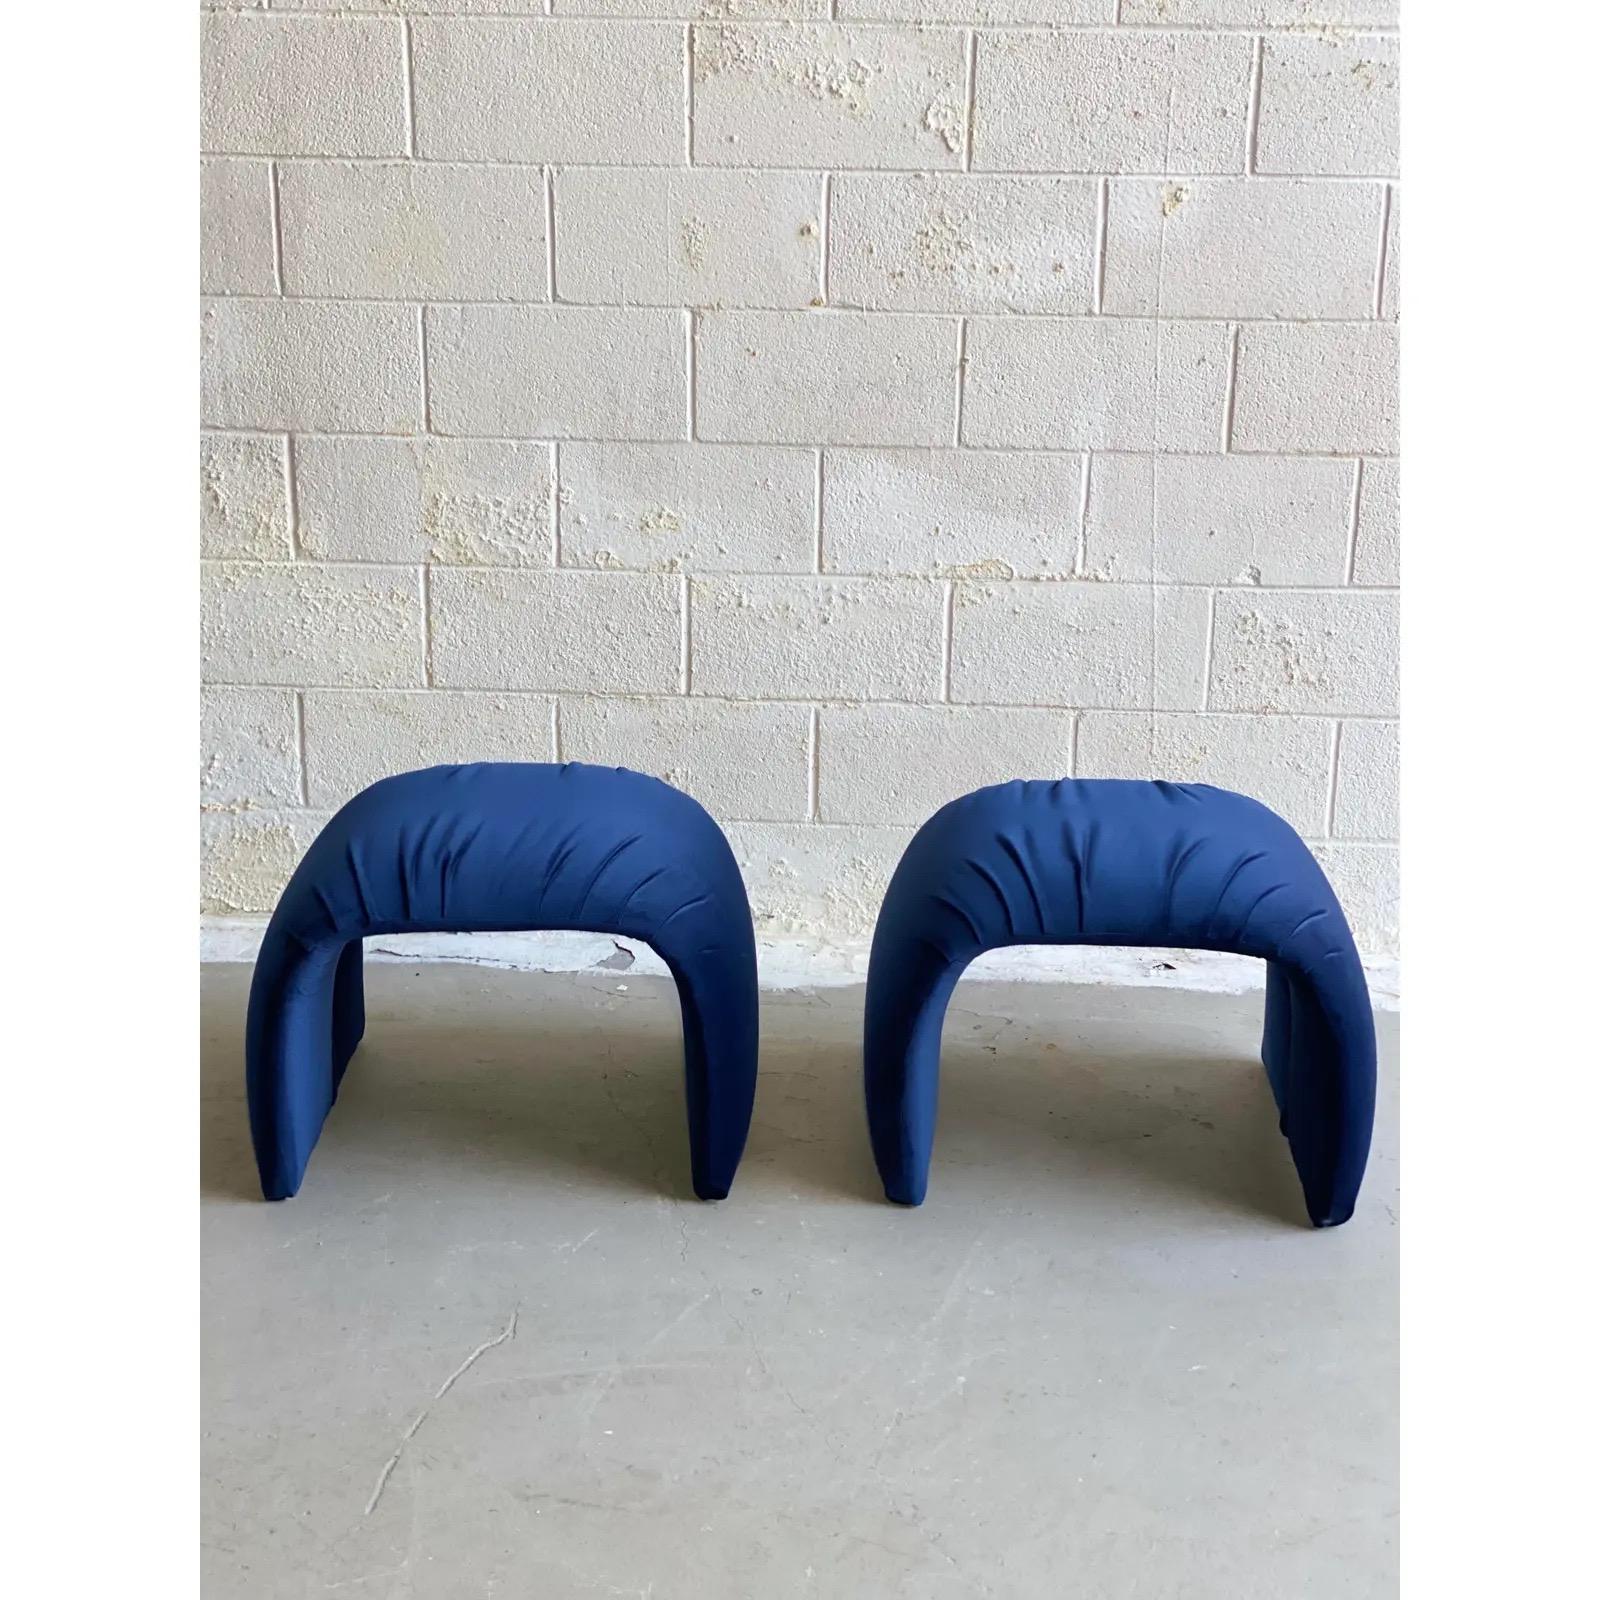 We are very pleased to offer a chic, vintage pair of ottomans, circa the 1980s. Layer a space or add extra seating with these eye-catching ottomans wrapped in a new rich, velvet blue fabric. In excellent condition and ready to be used for years to